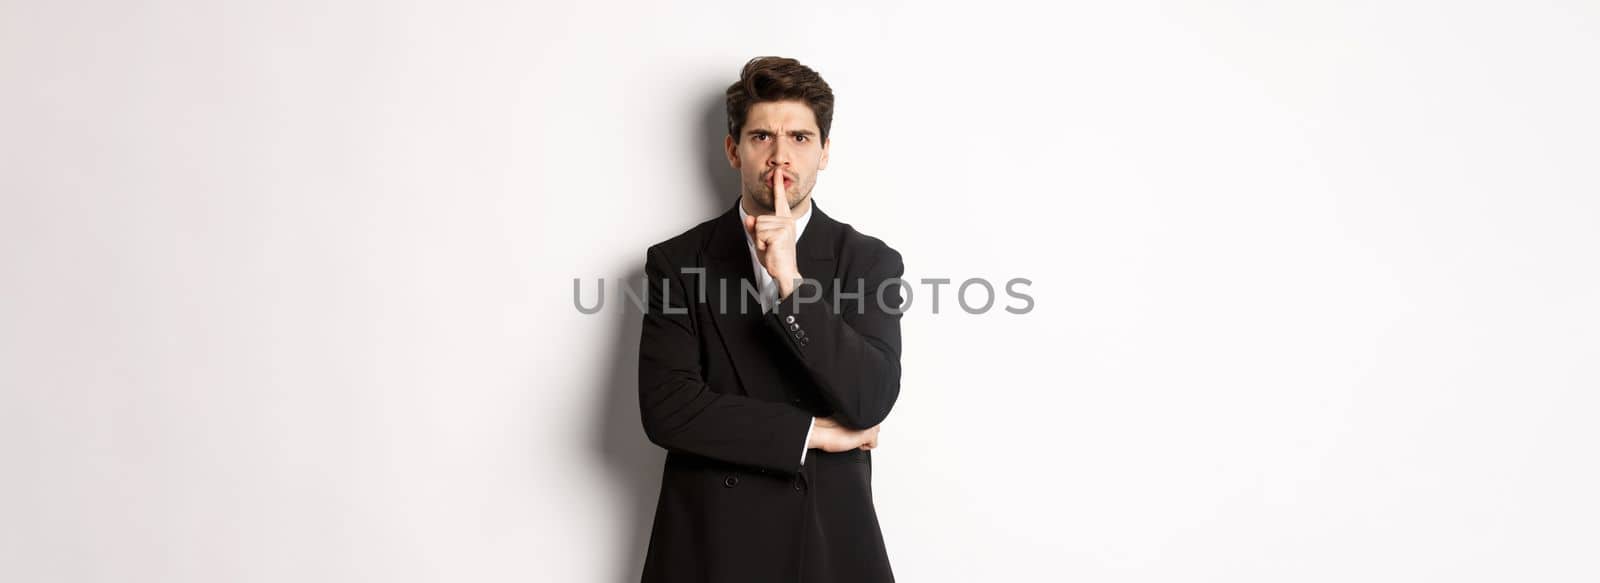 Portrait of angry boss in suit shushing at you, telling to be quiet, showing taboo hush sign and frowning, standing over white background.